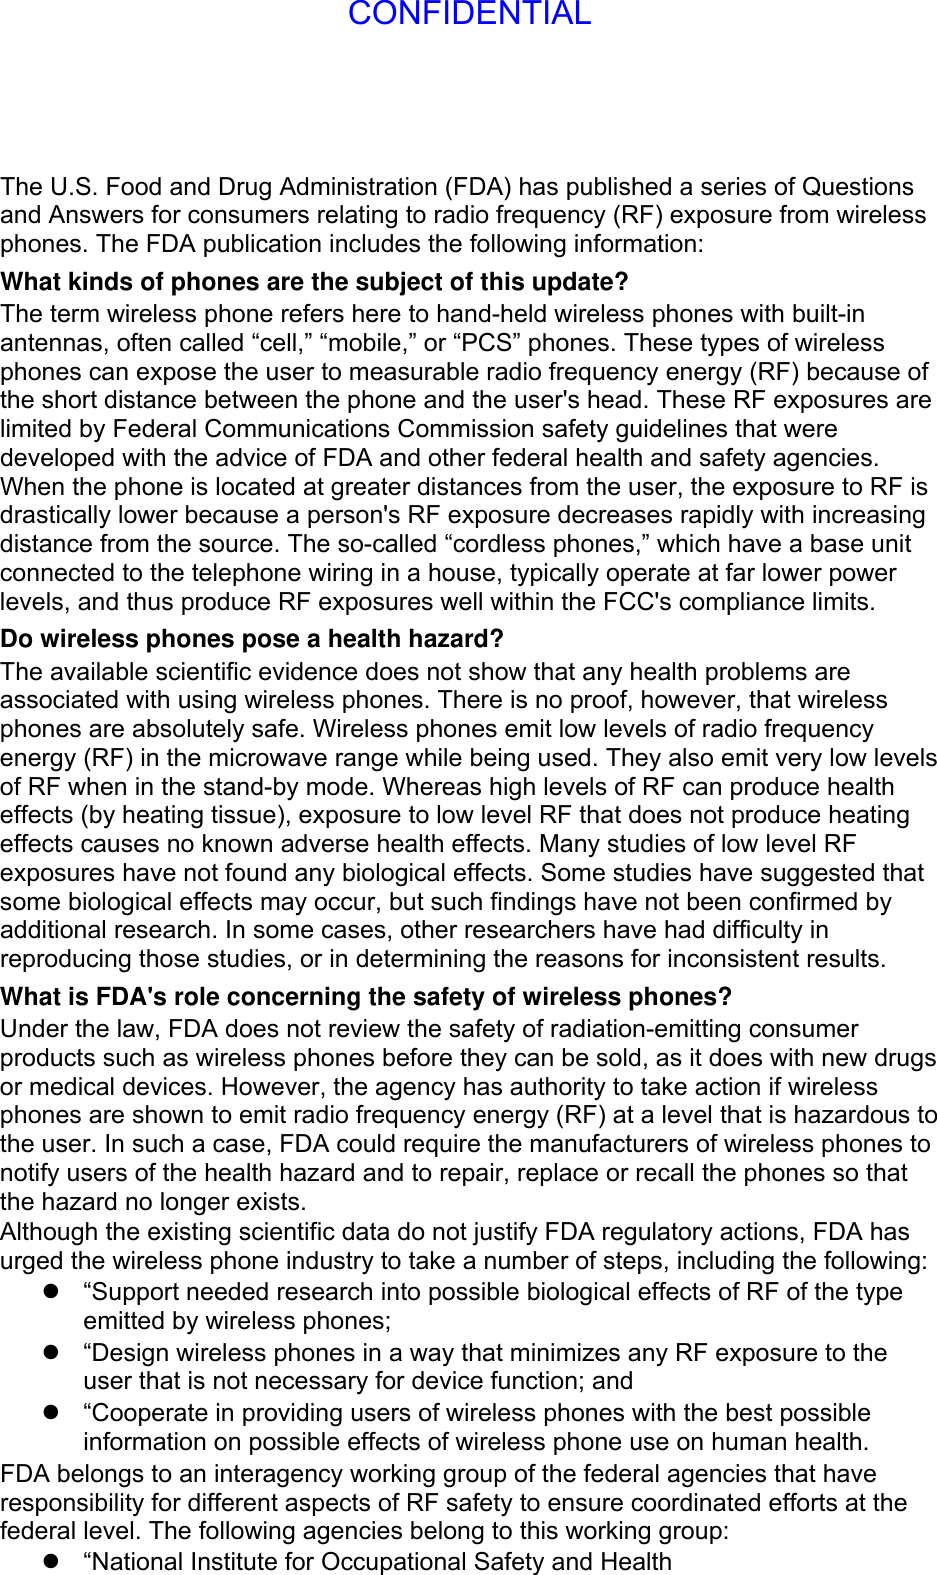 The U.S. Food and Drug Administration (FDA) has published a series of Questions and Answers for consumers relating to radio frequency (RF) exposure from wireless phones. The FDA publication includes the following information: What kinds of phones are the subject of this update? The term wireless phone refers here to hand-held wireless phones with built-in antennas, often called “cell,” “mobile,” or “PCS” phones. These types of wireless phones can expose the user to measurable radio frequency energy (RF) because of the short distance between the phone and the user&apos;s head. These RF exposures are limited by Federal Communications Commission safety guidelines that were developed with the advice of FDA and other federal health and safety agencies. When the phone is located at greater distances from the user, the exposure to RF is drastically lower because a person&apos;s RF exposure decreases rapidly with increasing distance from the source. The so-called “cordless phones,” which have a base unit connected to the telephone wiring in a house, typically operate at far lower power levels, and thus produce RF exposures well within the FCC&apos;s compliance limits. Do wireless phones pose a health hazard? The available scientific evidence does not show that any health problems are associated with using wireless phones. There is no proof, however, that wireless phones are absolutely safe. Wireless phones emit low levels of radio frequency energy (RF) in the microwave range while being used. They also emit very low levels of RF when in the stand-by mode. Whereas high levels of RF can produce health effects (by heating tissue), exposure to low level RF that does not produce heating effects causes no known adverse health effects. Many studies of low level RF exposures have not found any biological effects. Some studies have suggested that some biological effects may occur, but such findings have not been confirmed by additional research. In some cases, other researchers have had difficulty in reproducing those studies, or in determining the reasons for inconsistent results. What is FDA&apos;s role concerning the safety of wireless phones? Under the law, FDA does not review the safety of radiation-emitting consumer products such as wireless phones before they can be sold, as it does with new drugs or medical devices. However, the agency has authority to take action if wireless phones are shown to emit radio frequency energy (RF) at a level that is hazardous to the user. In such a case, FDA could require the manufacturers of wireless phones to notify users of the health hazard and to repair, replace or recall the phones so that the hazard no longer exists. Although the existing scientific data do not justify FDA regulatory actions, FDA has urged the wireless phone industry to take a number of steps, including the following:   “Support needed research into possible biological effects of RF of the type emitted by wireless phones;   “Design wireless phones in a way that minimizes any RF exposure to the user that is not necessary for device function; and   “Cooperate in providing users of wireless phones with the best possible information on possible effects of wireless phone use on human health. FDA belongs to an interagency working group of the federal agencies that have responsibility for different aspects of RF safety to ensure coordinated efforts at the federal level. The following agencies belong to this working group:   “National Institute for Occupational Safety and Health CONFIDENTIAL